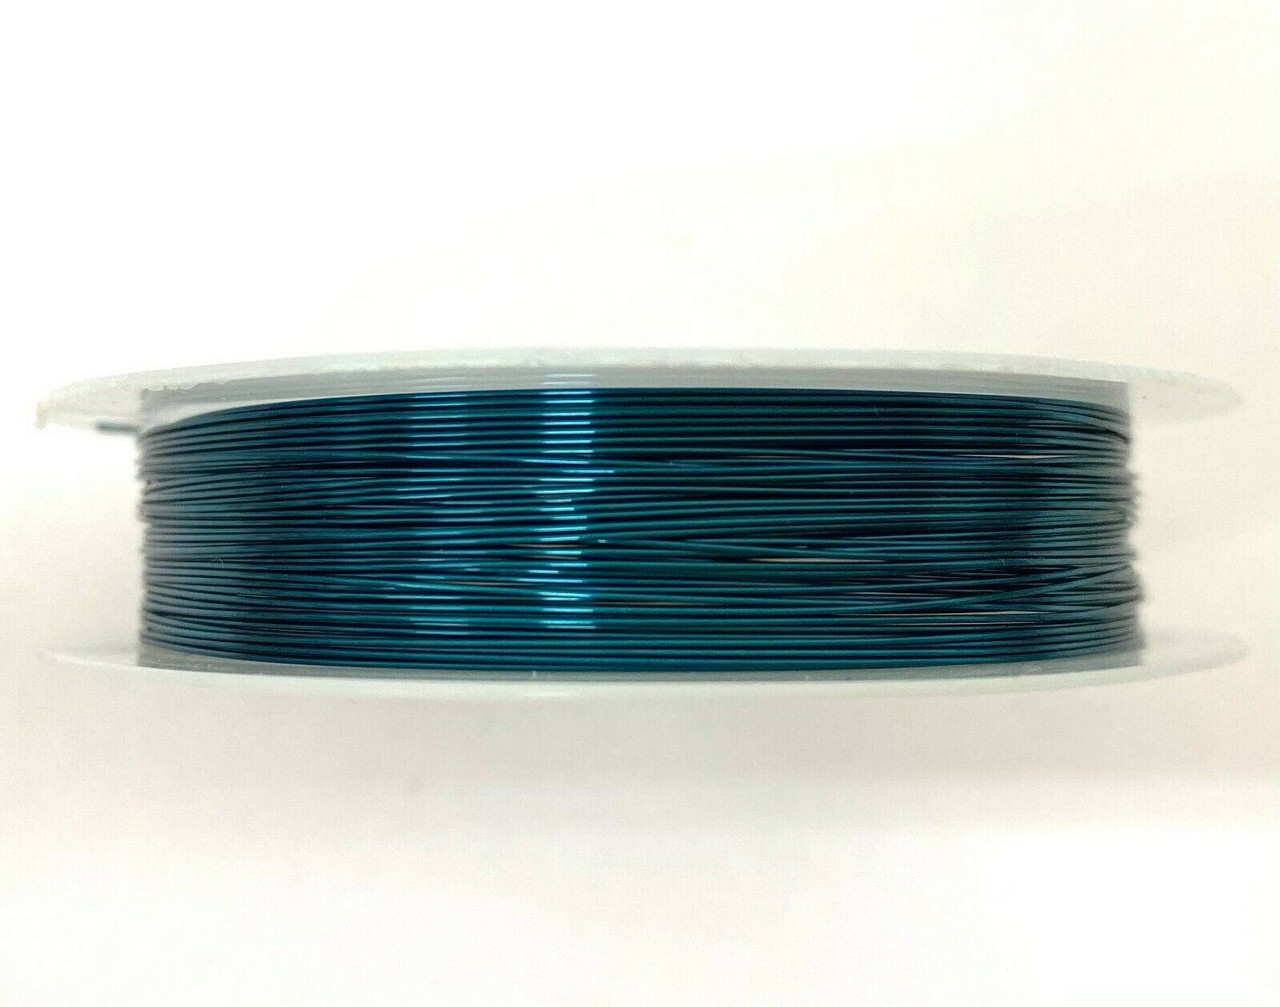 Roll of Copper Wire, 0.4mm thickness, PETROL colour, approx 10m length